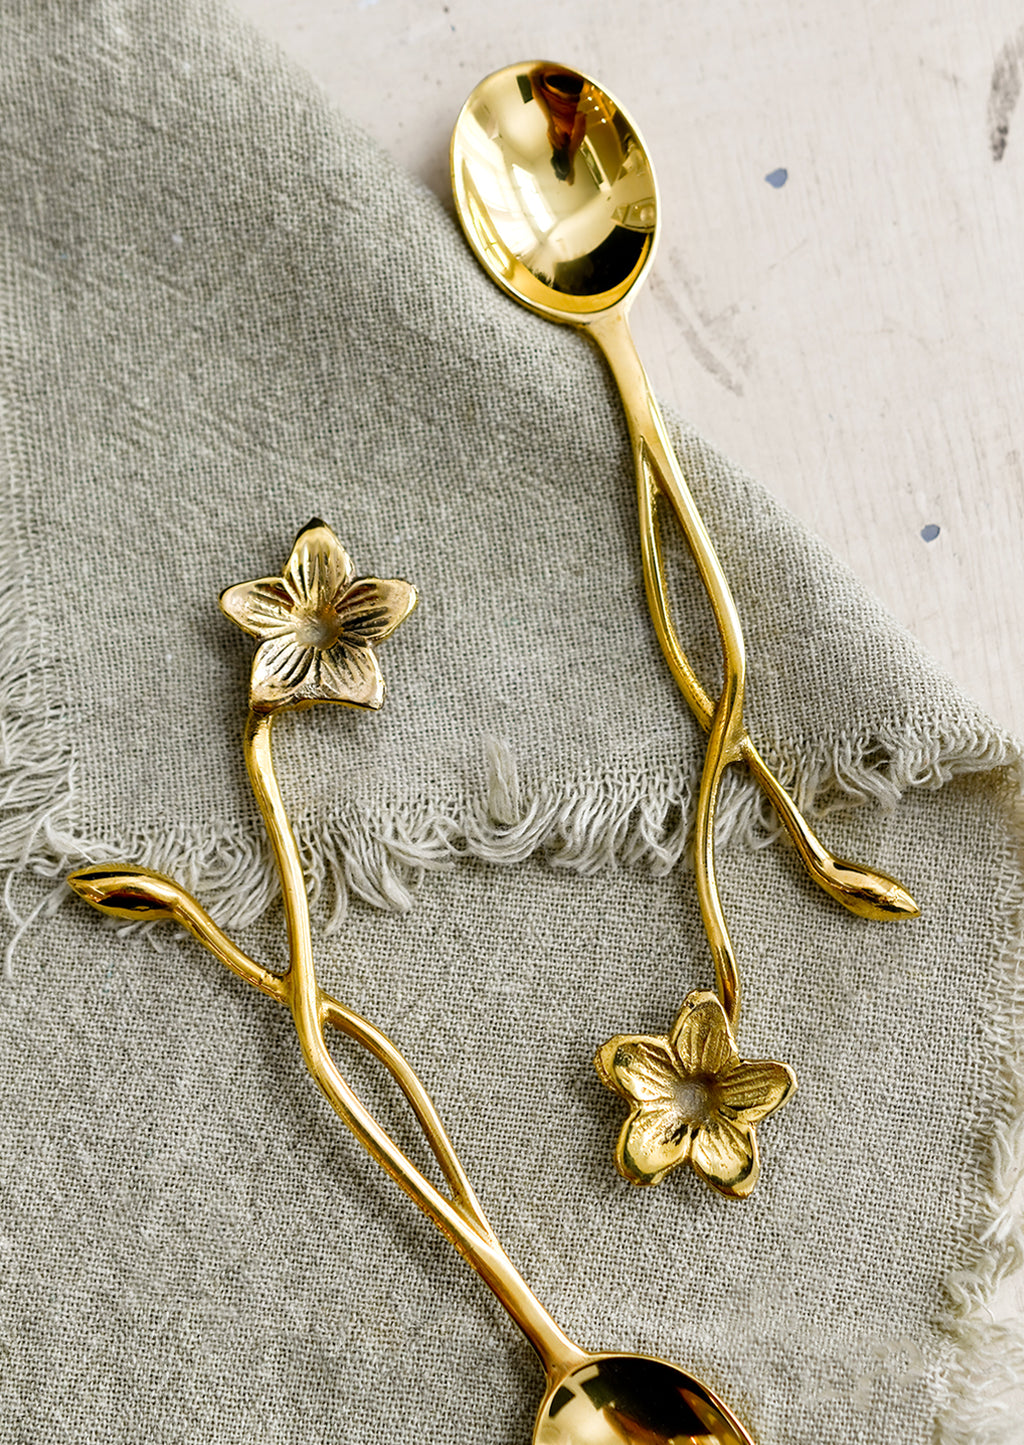 2: A brass spoon with freeform flower and stem handle.